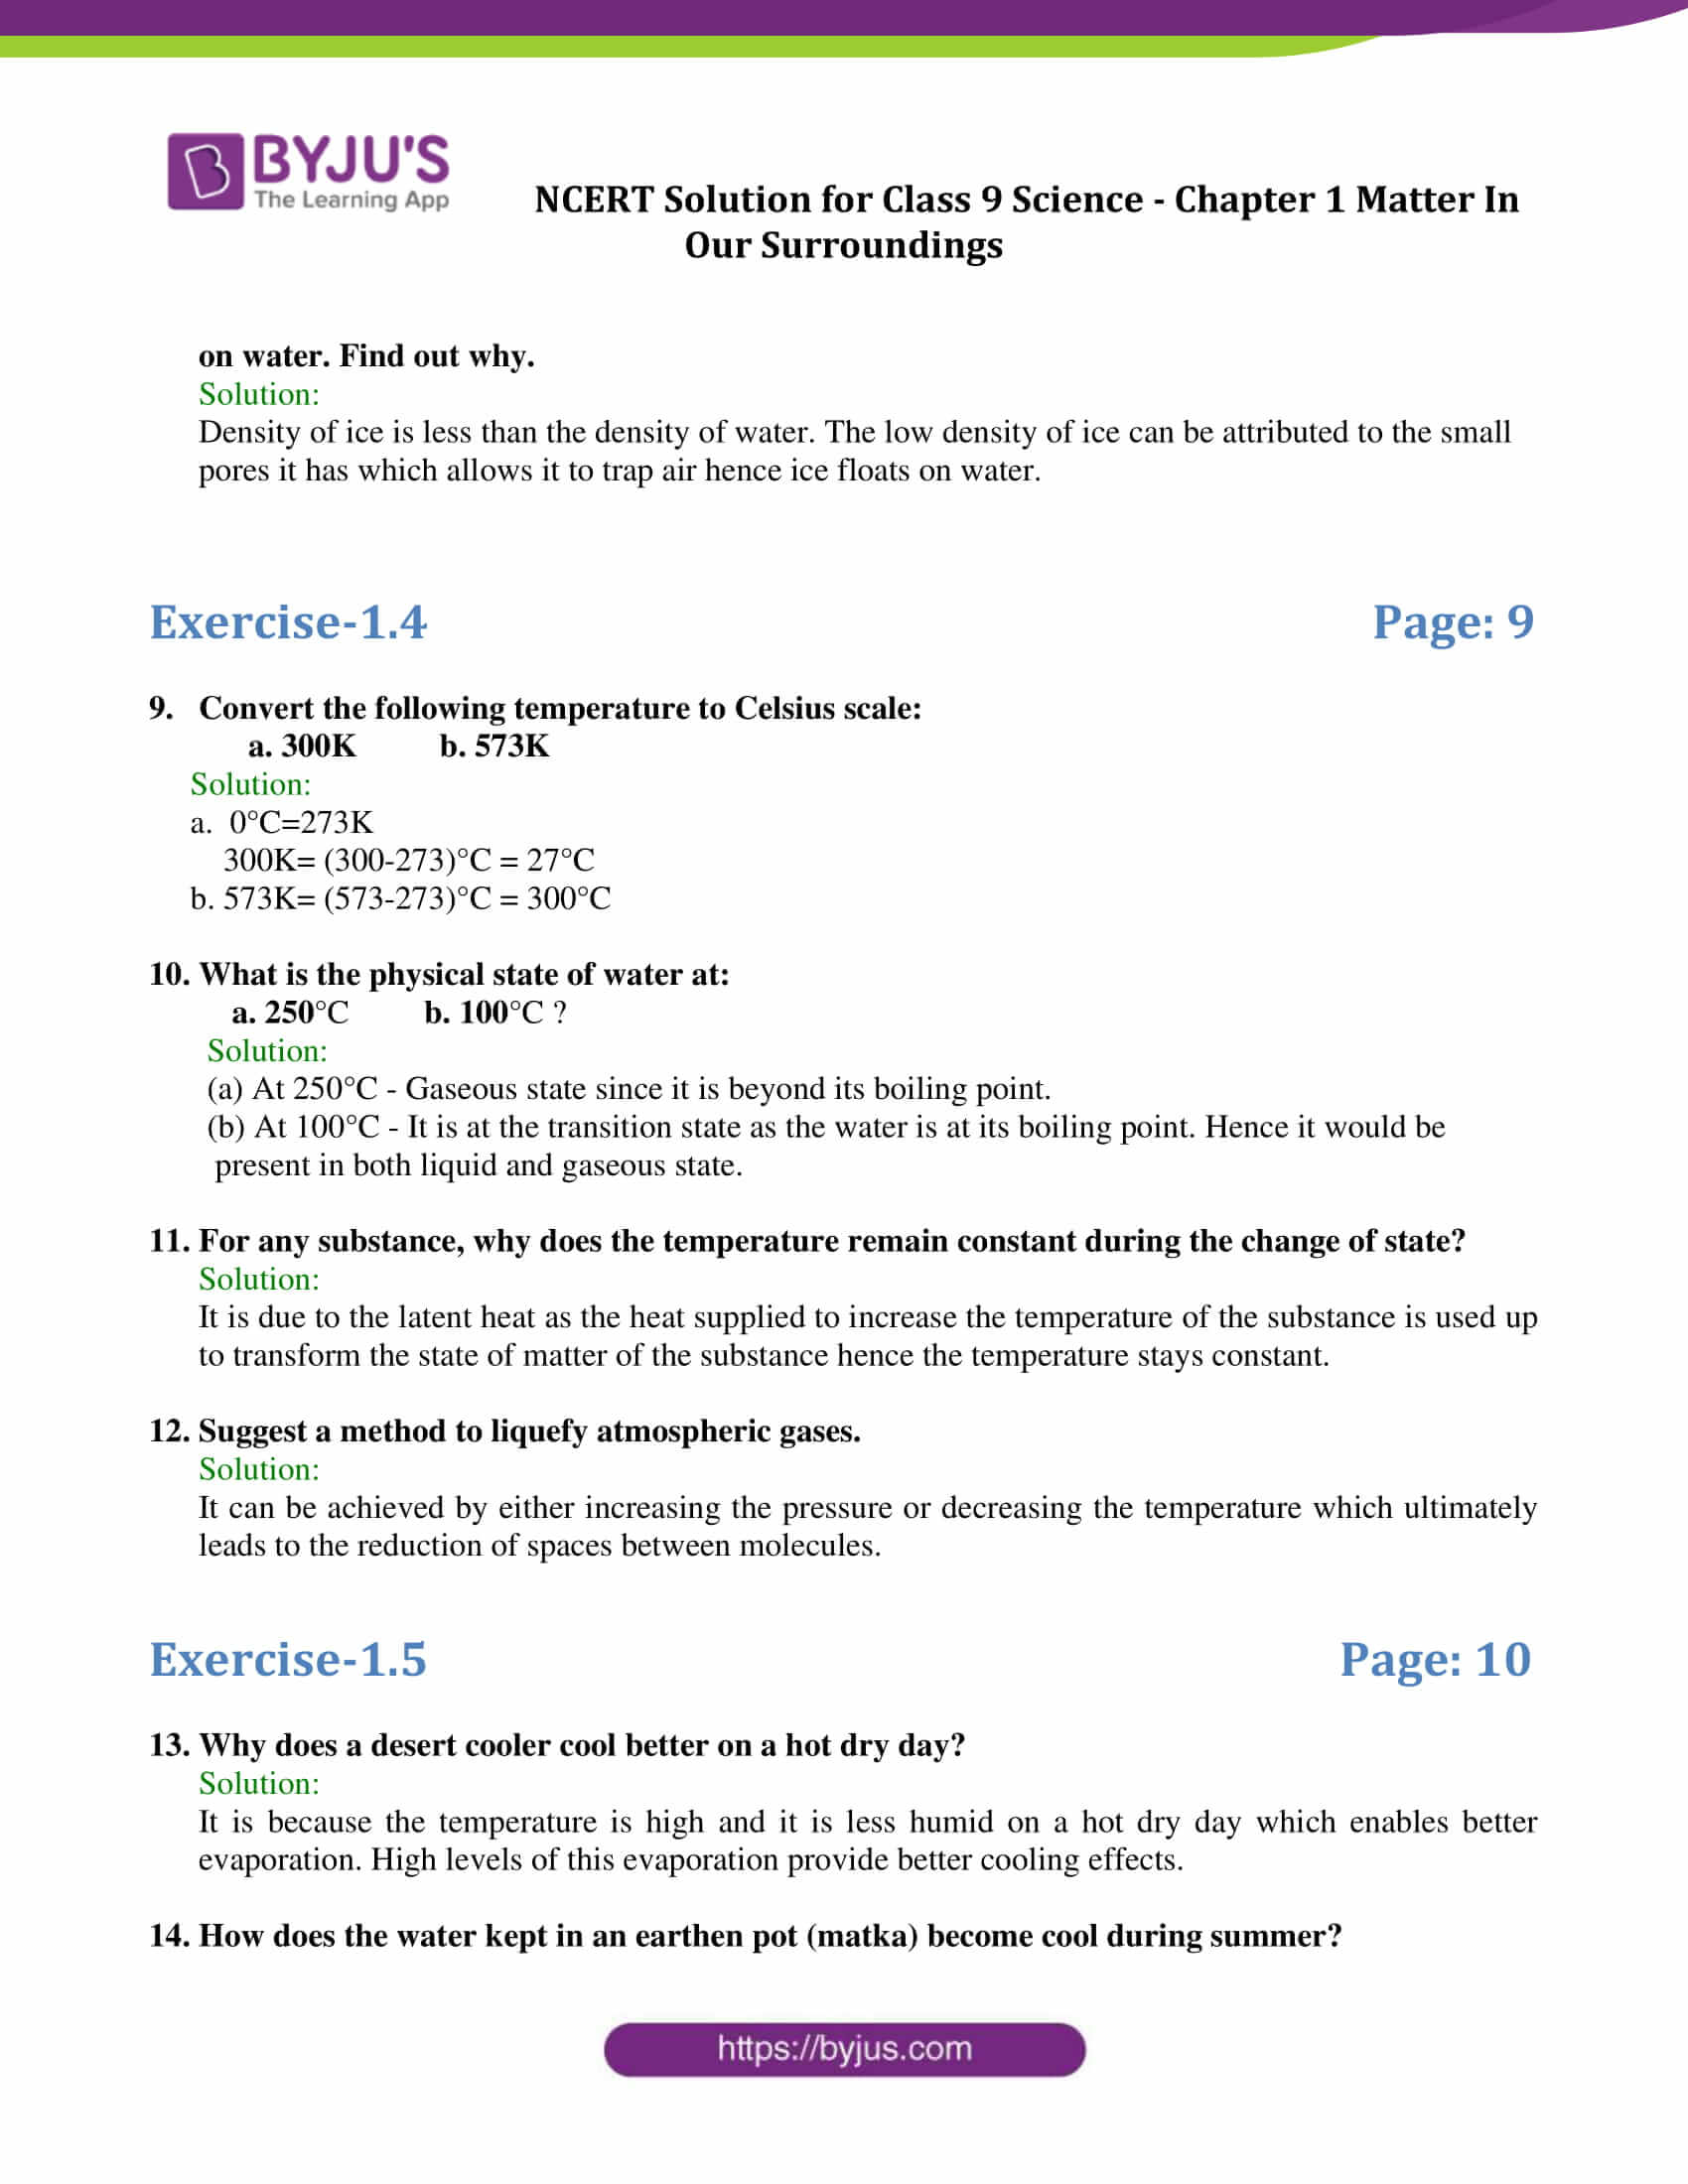 NCERT Solutions Class 9 Science Chapter 1 Matter In Our Surroundings